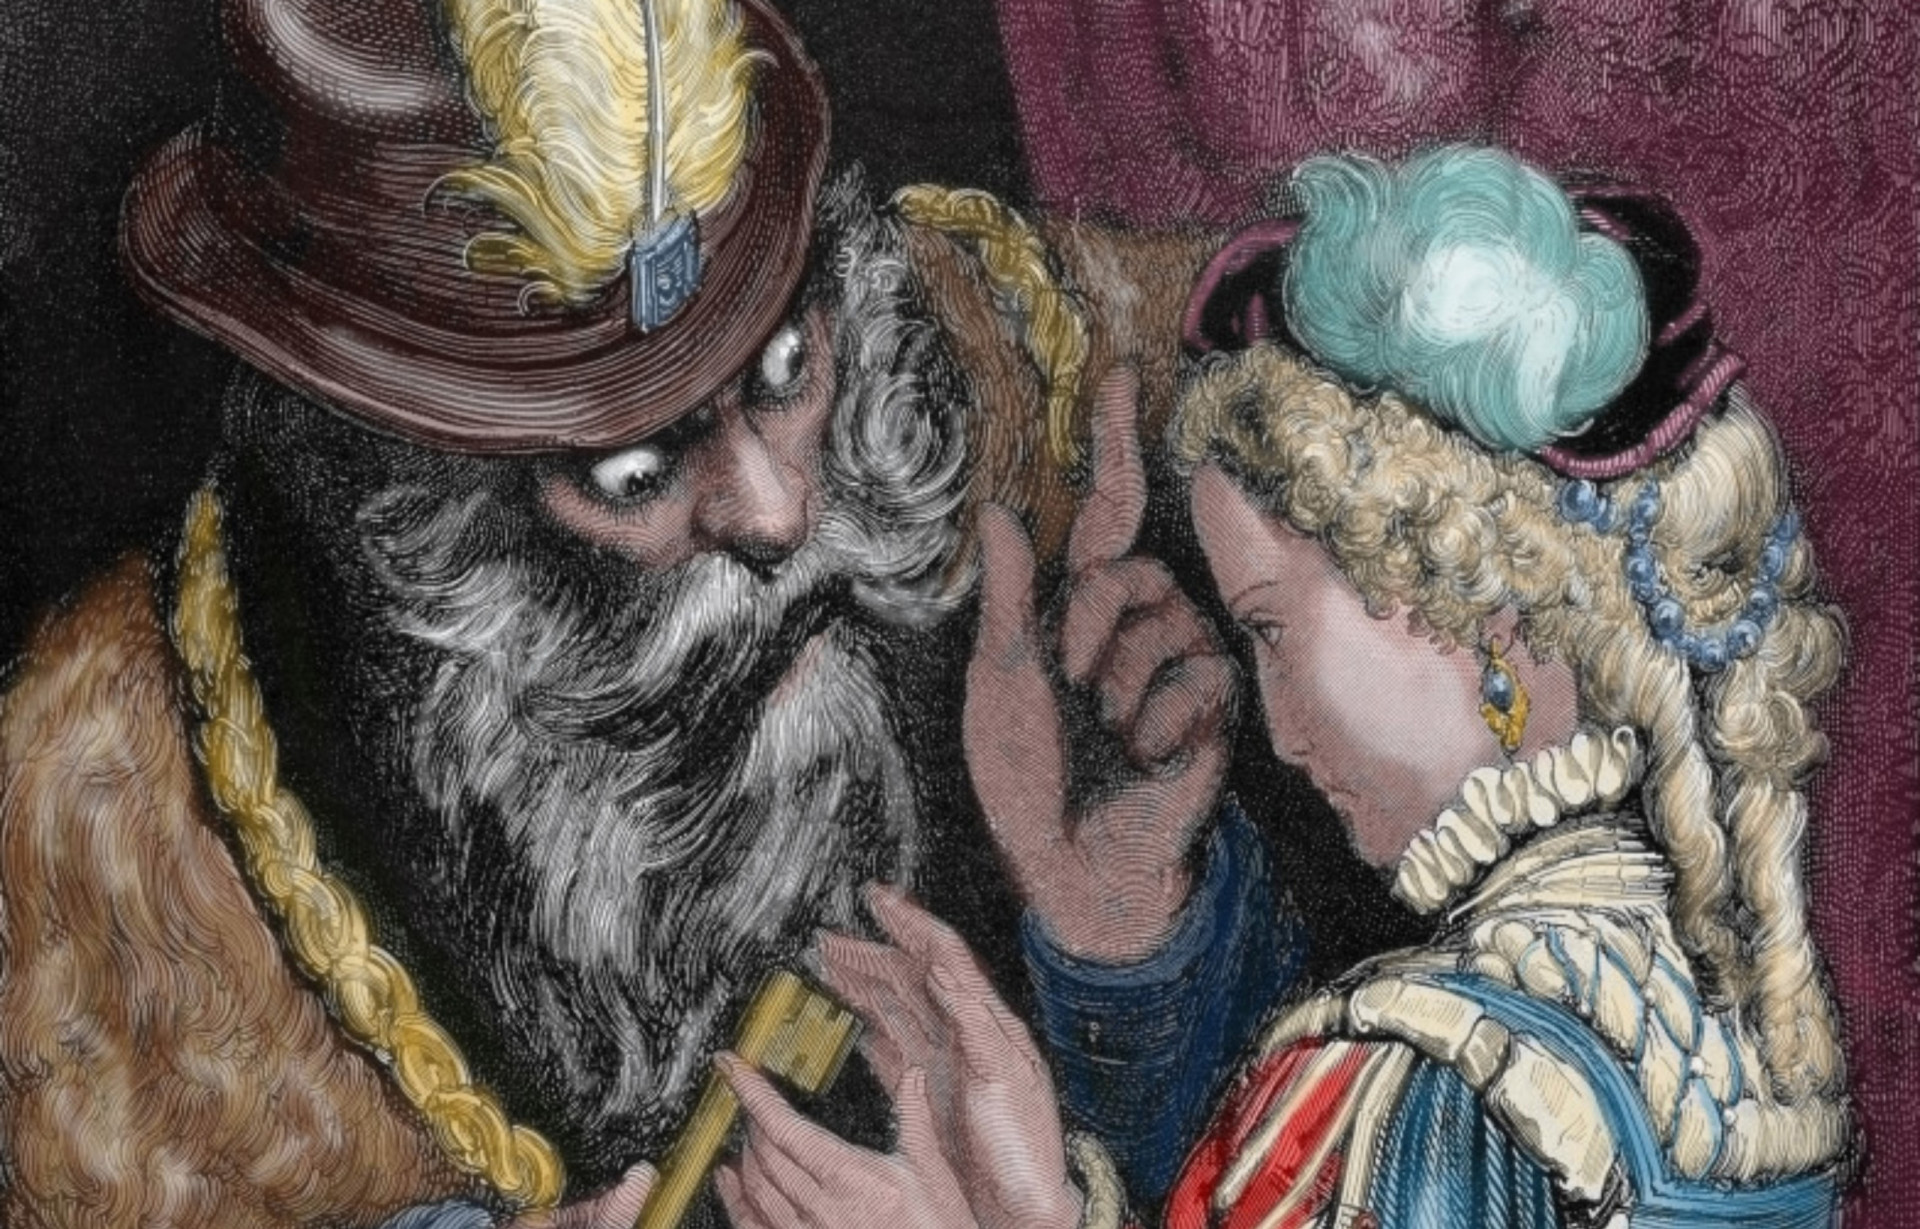 Who was Bluebeard, and why did he murder so many women?